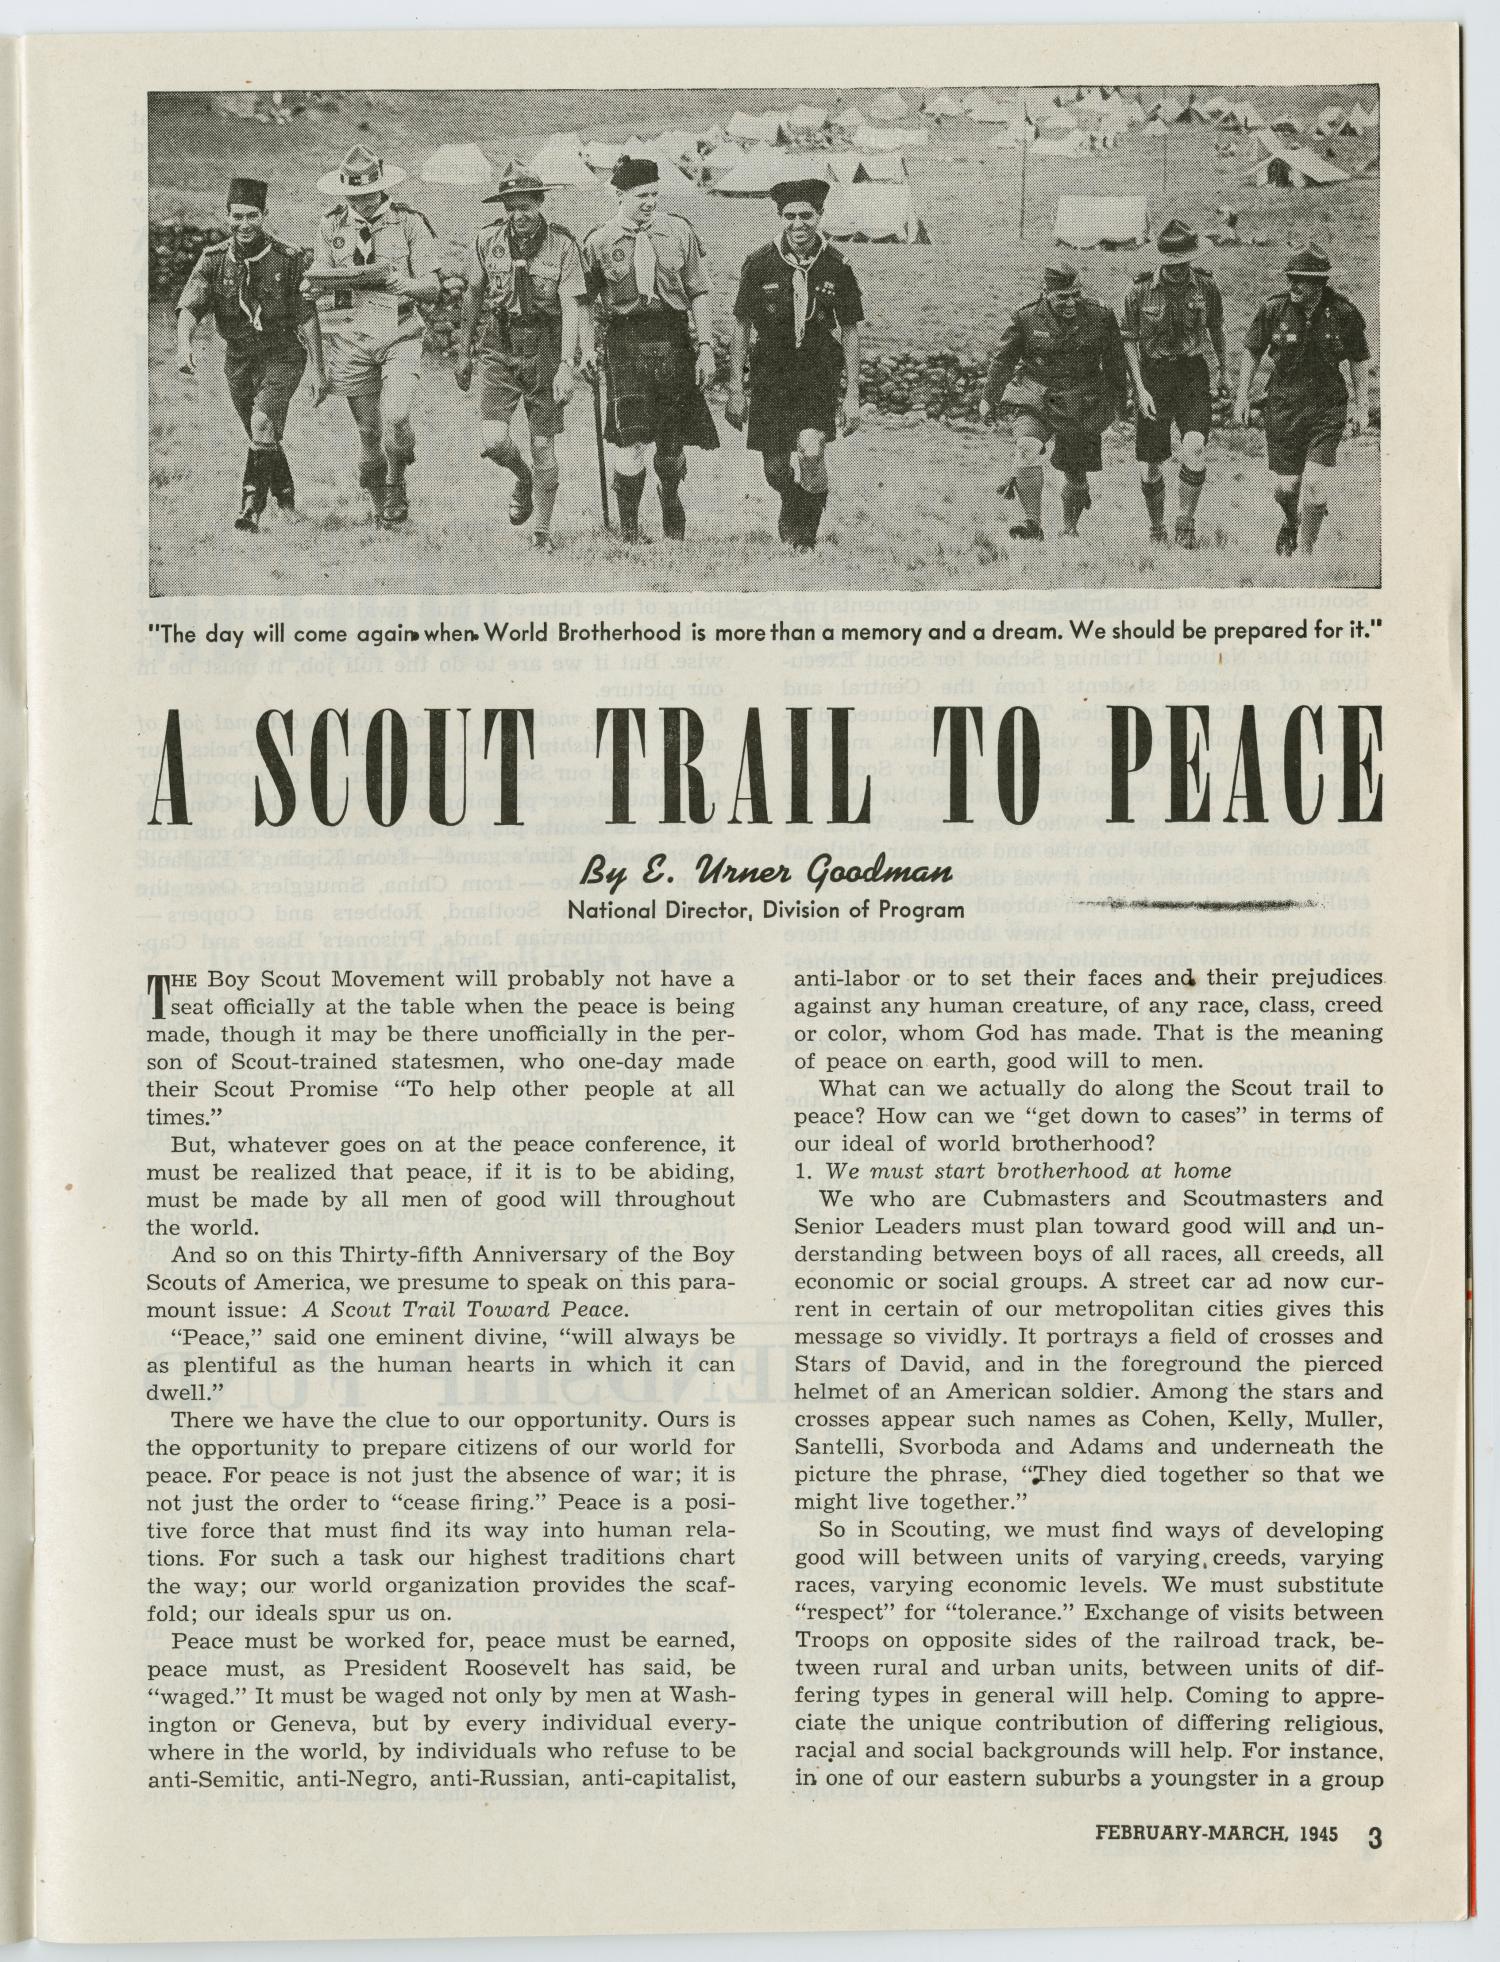 Scouting, Volume 33, Number 2, February-March 1945
                                                
                                                    3
                                                